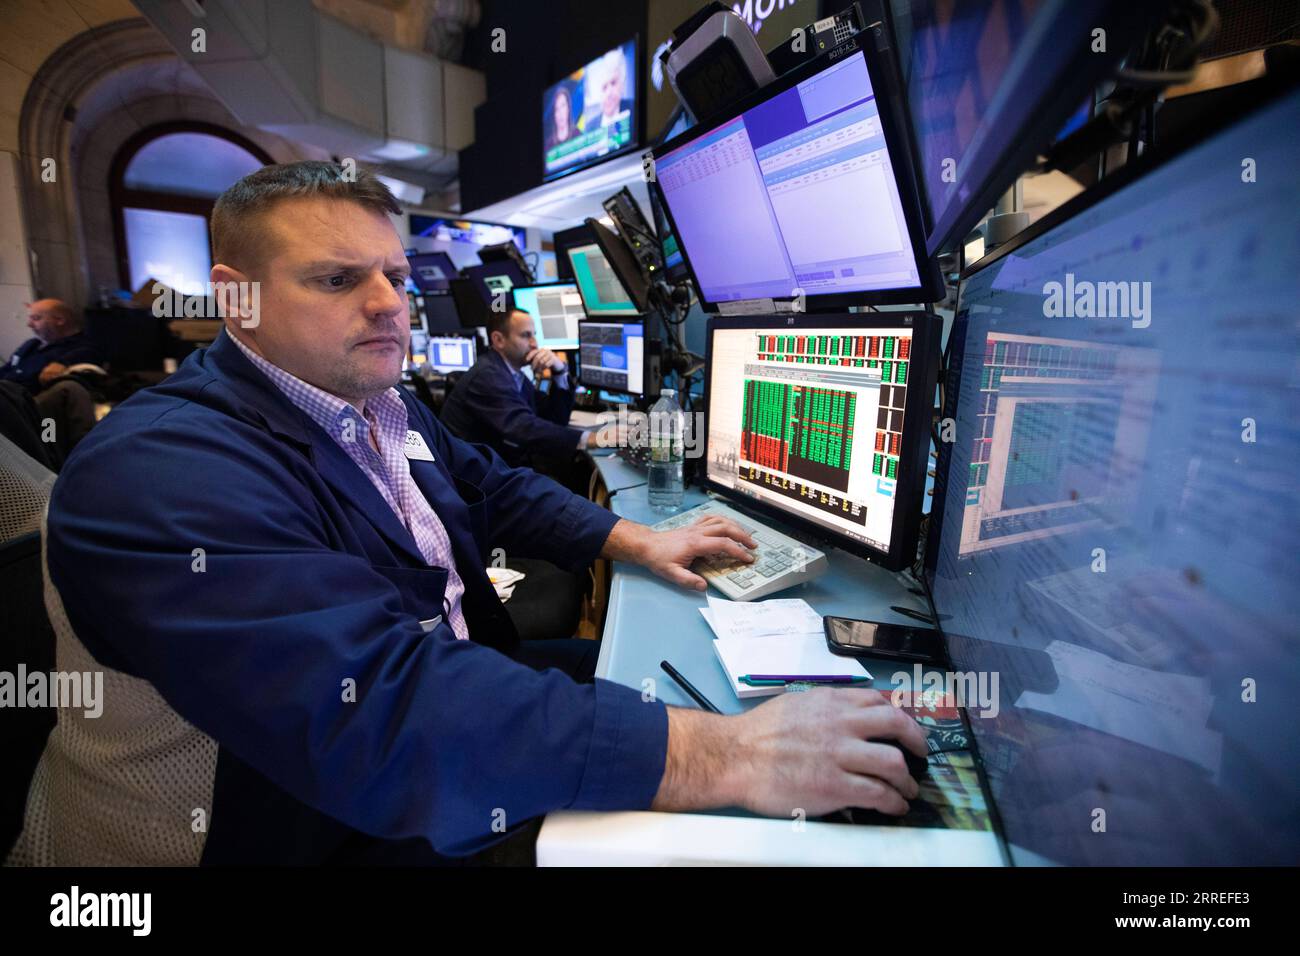 220226 -- NEW YORK, Feb. 26, 2022 -- Traders work at the New York Stock Exchange in New York, the United States, Feb. 25, 2022. U.S. stocks surged on Friday with the Dow logging its best day in over a year, as Wall Street closely followed updates on the Russia-Ukraine tensions. The Dow Jones Industrial Average jumped 834.92 points, or 2.51 percent, to 34,058.75. The S&P 500 rose 95.95 points, or 2.24 percent, to 4,384.65. The Nasdaq Composite Index increased 221.03 points, or 1.64 percent, to 13,694.62.  U.S.-NEW YORK-STOCK MARKET WangxYing PUBLICATIONxNOTxINxCHN Stock Photo